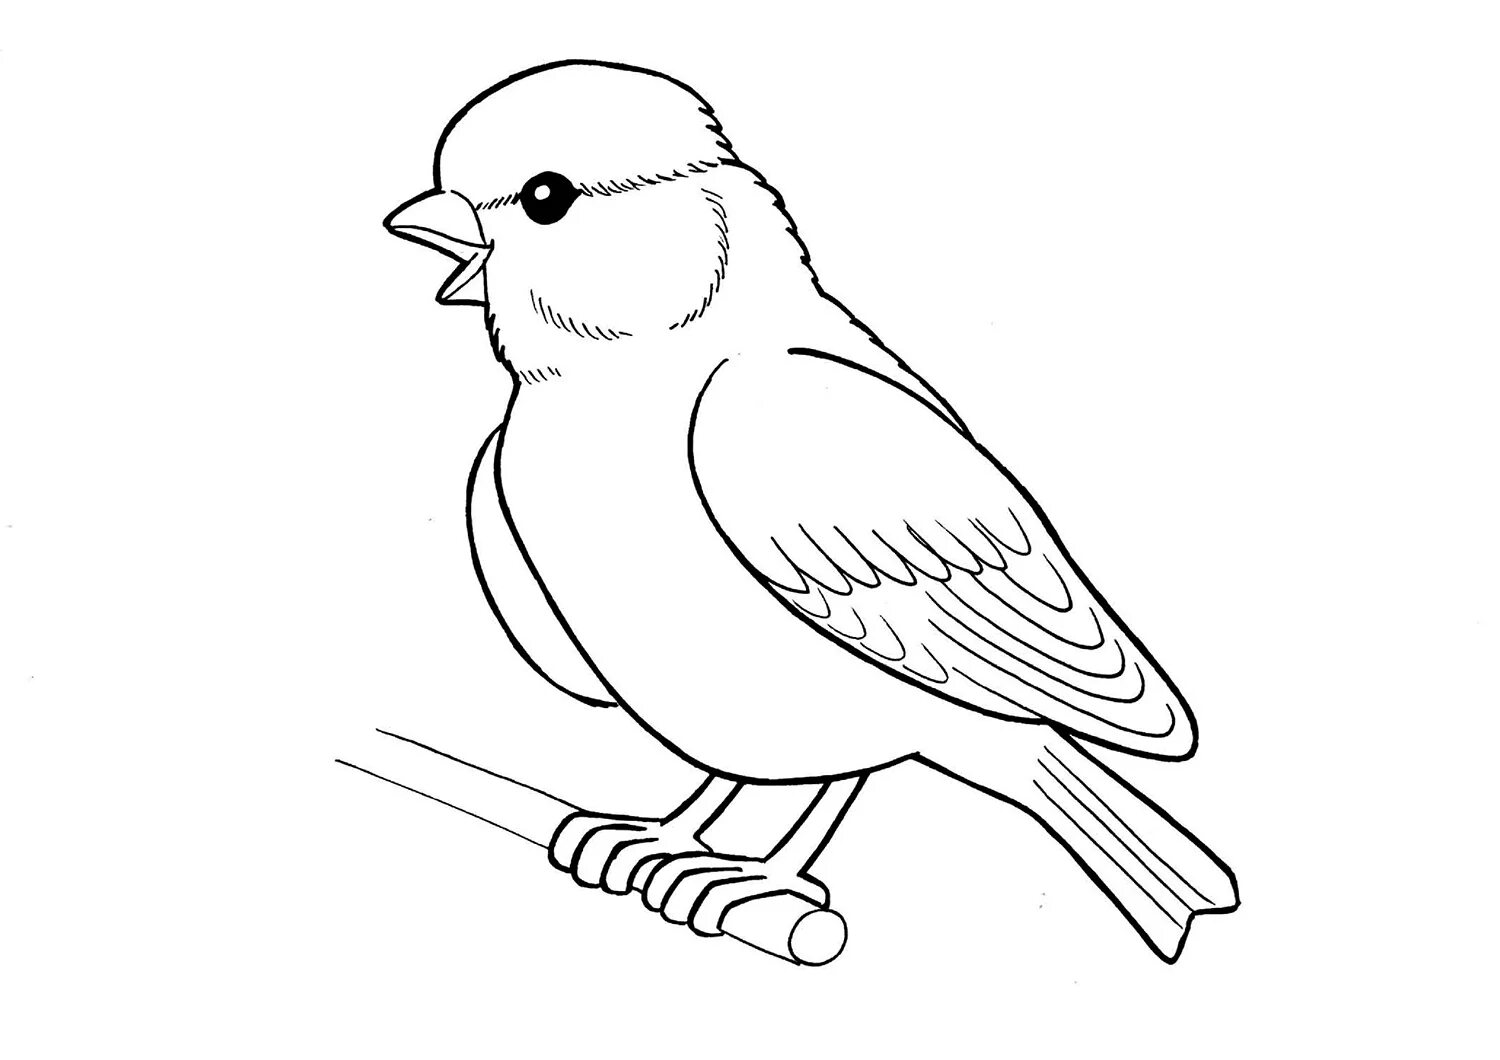 Sparrow coloring book for kids